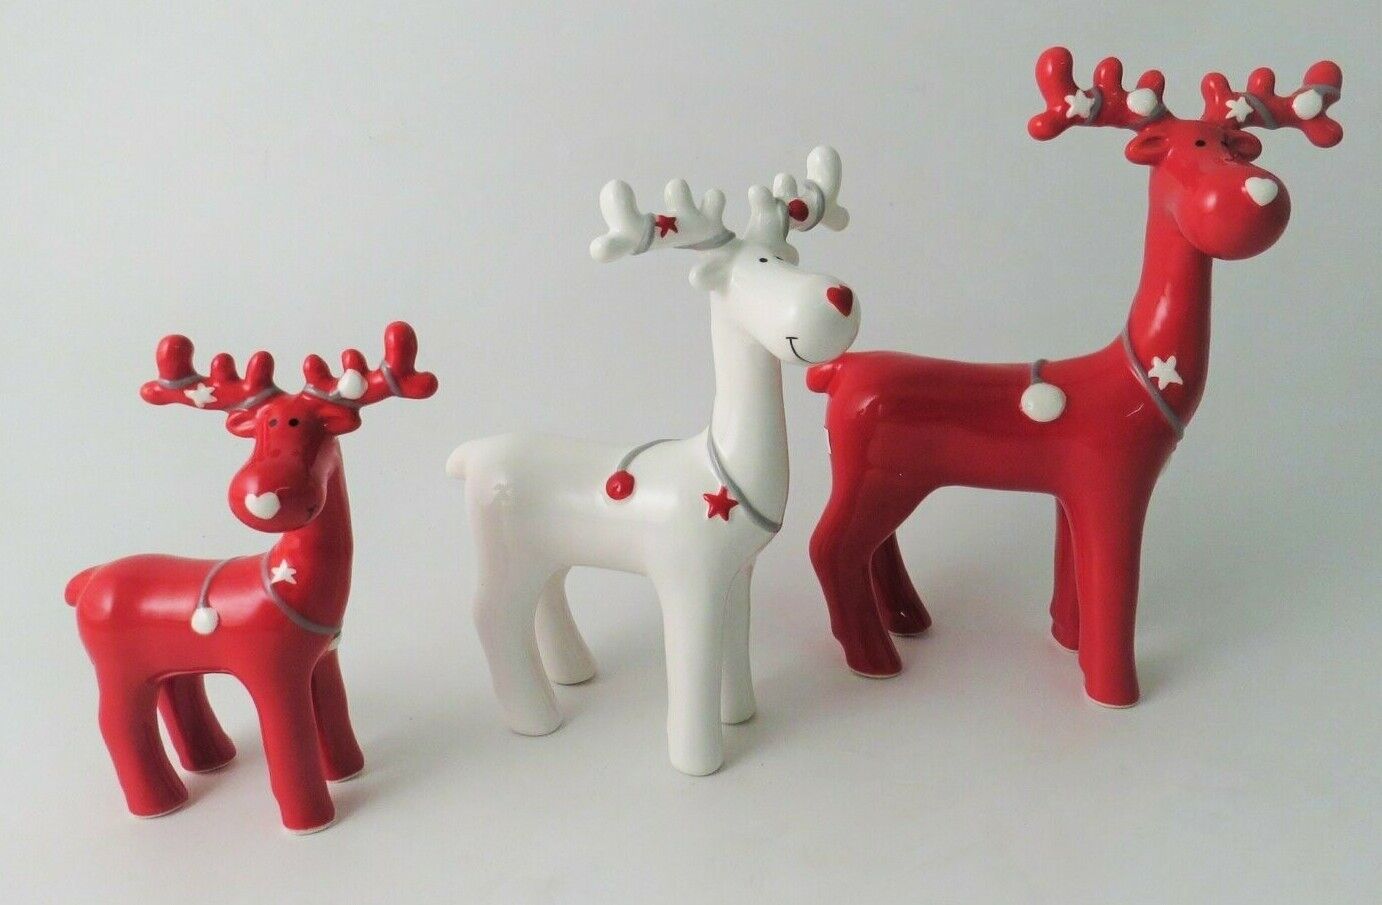 Red or White Ceramic Reindeer Christmas Decorations